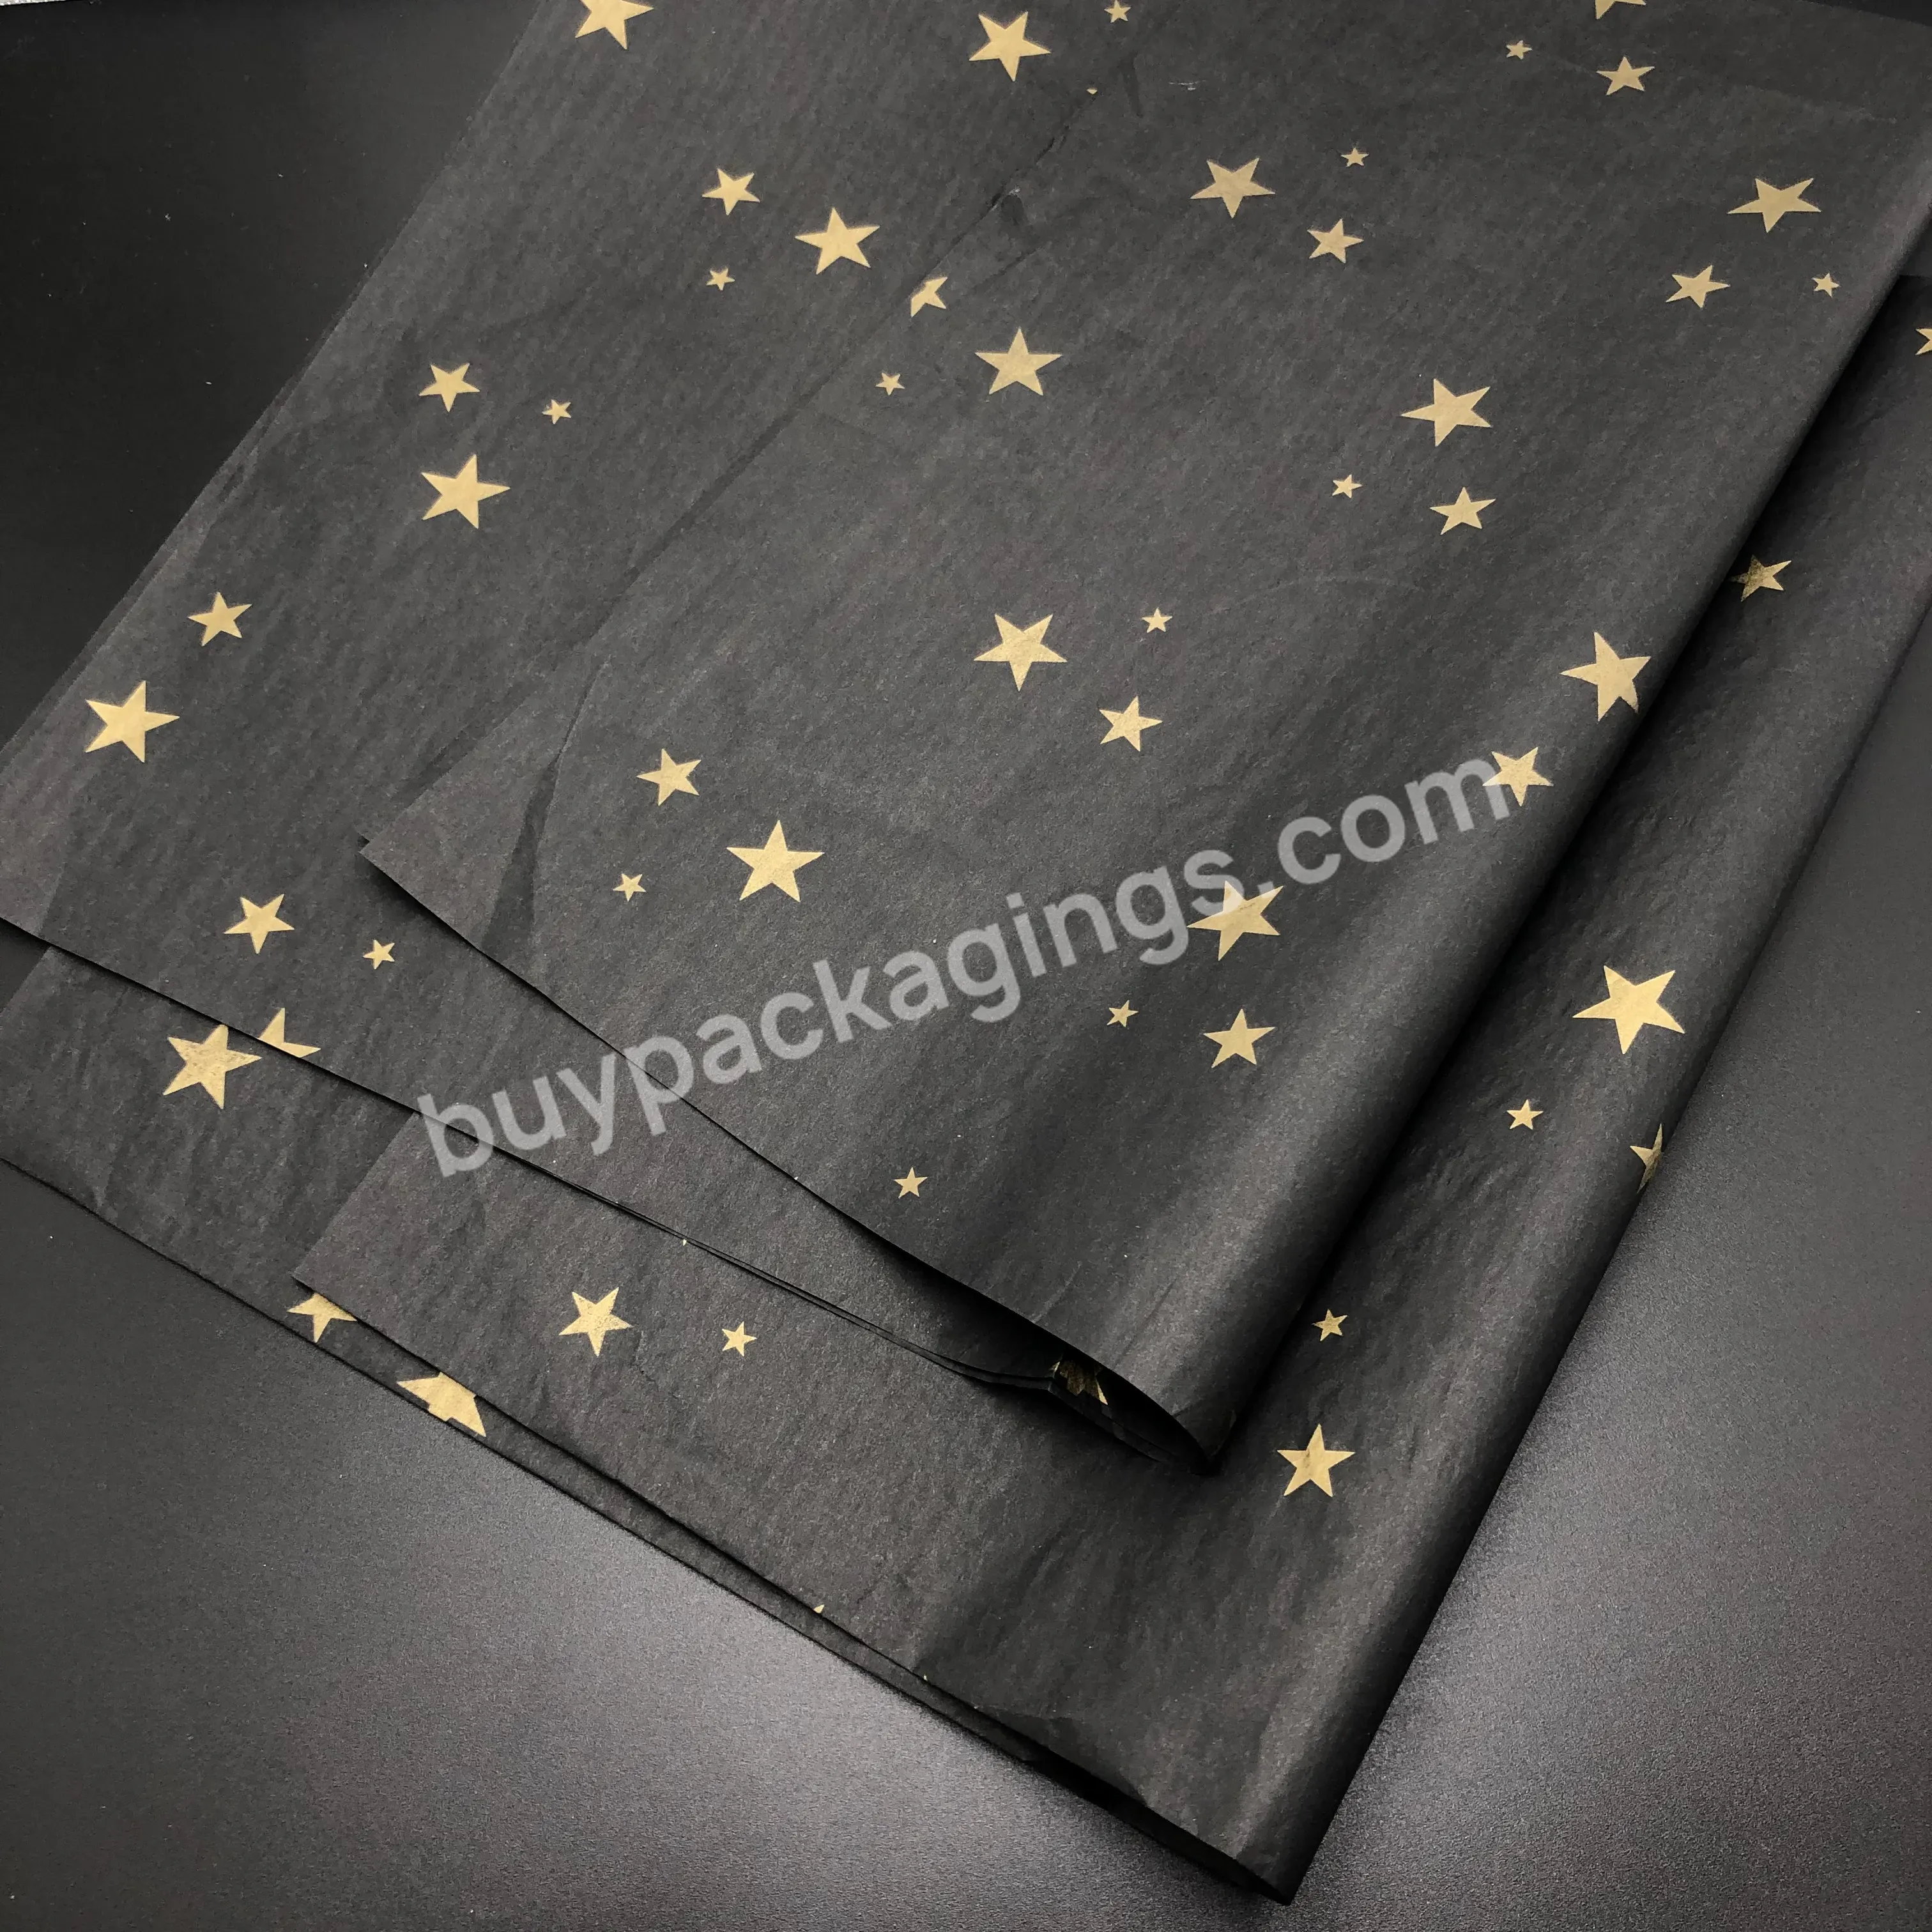 17g Stock Acid Free Tissue Paper With Gold Star Printed Logo Wrapping Paper/mf Acid Free Tissue Paper - Buy Stock Tissue Paper,Wrapping Paper,17g Tissue Paper.